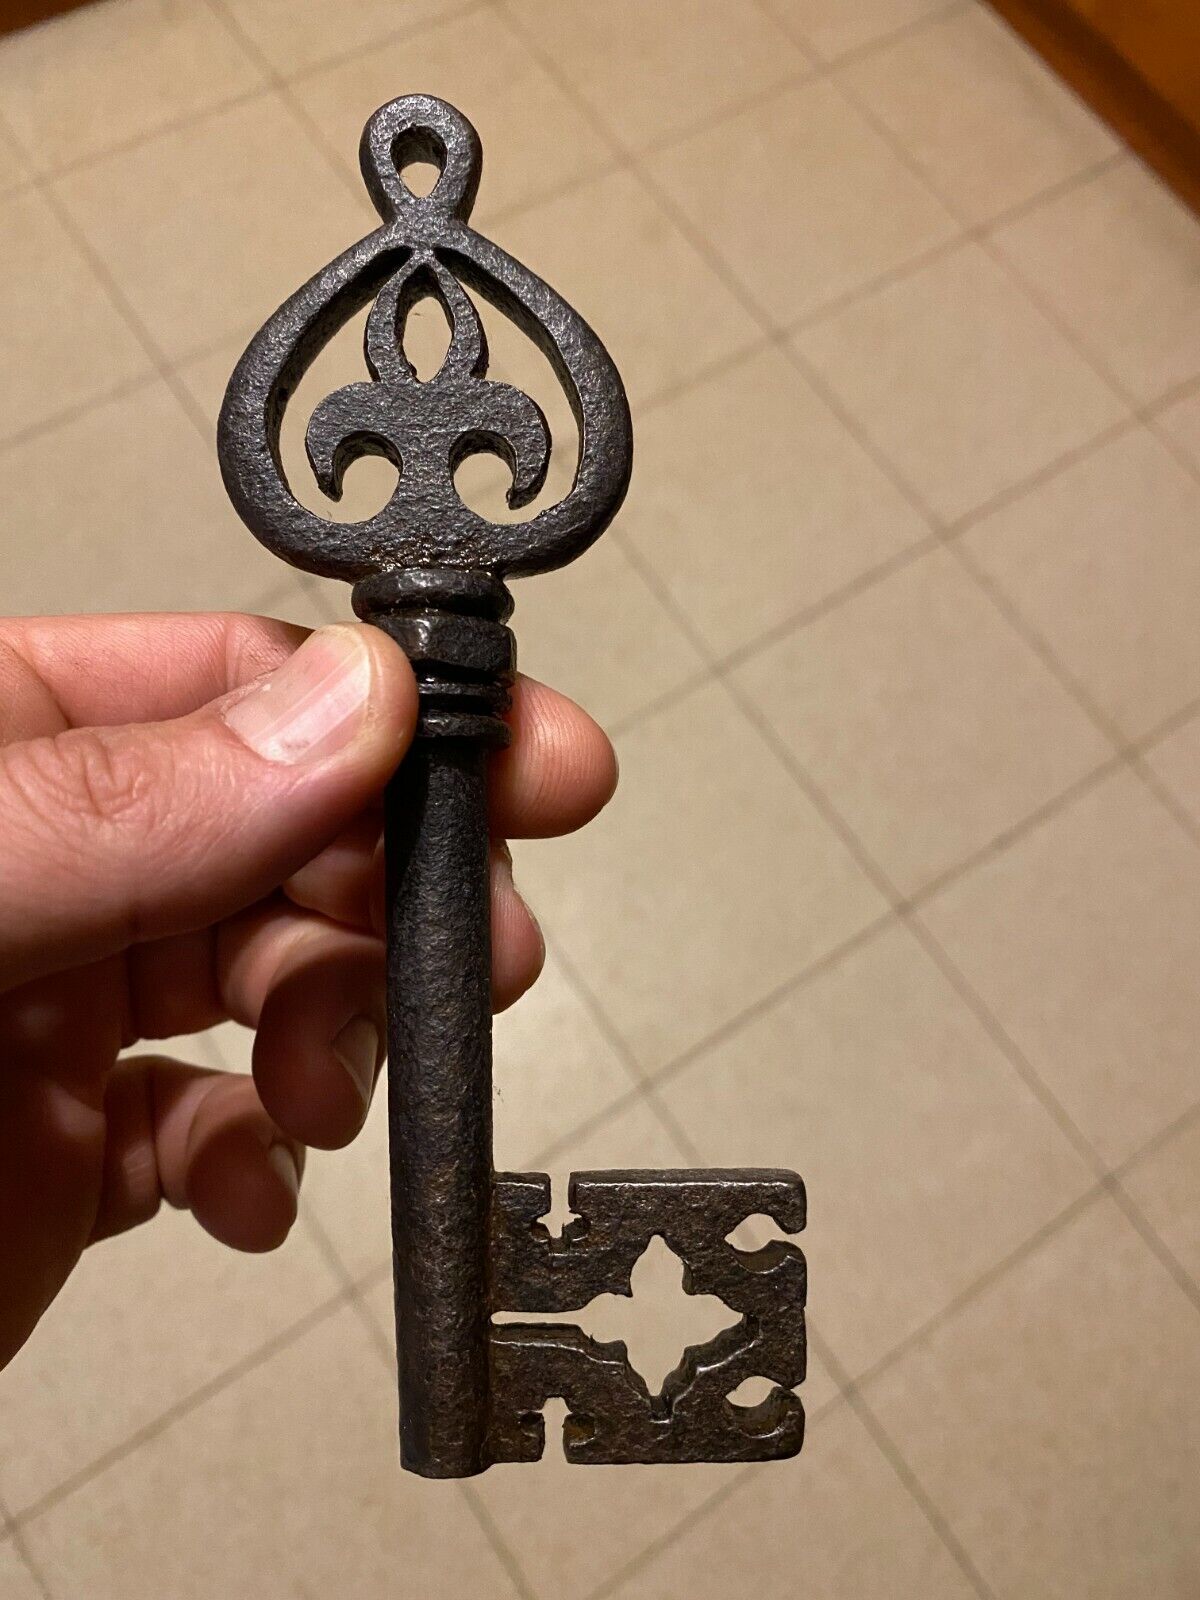 Antique Renaissance collectible rare key probably from 16th-17th 